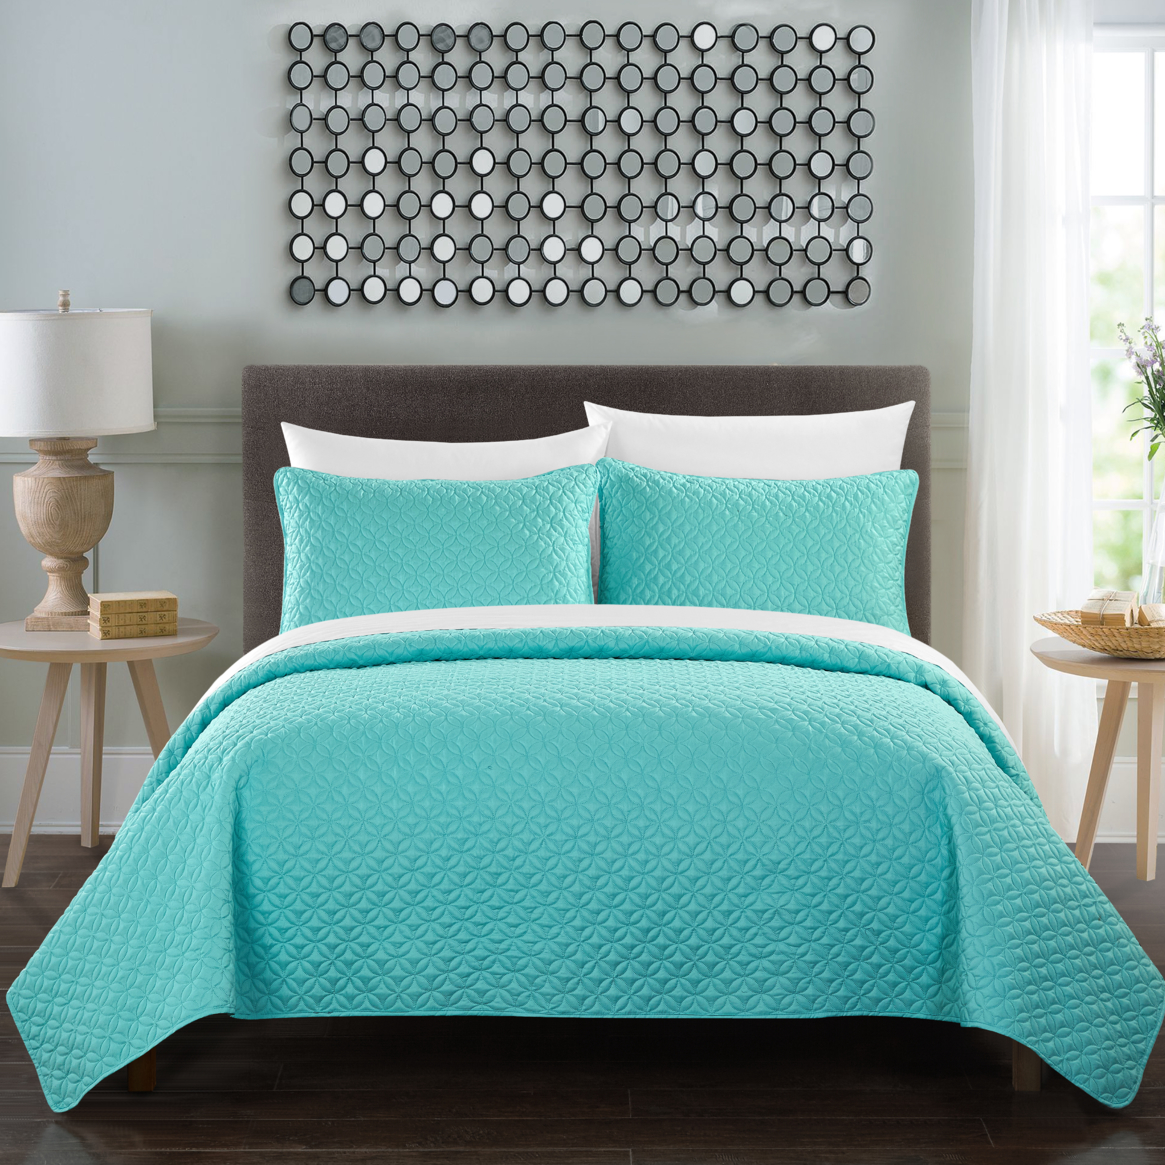 Gideon 7 Or 5 Piece Quilt Cover Set Rose Star Geometric Quilted Bed In A Bag - Sheet Set Decorative Pillow Shams Included - Aqua, Twin X-lon